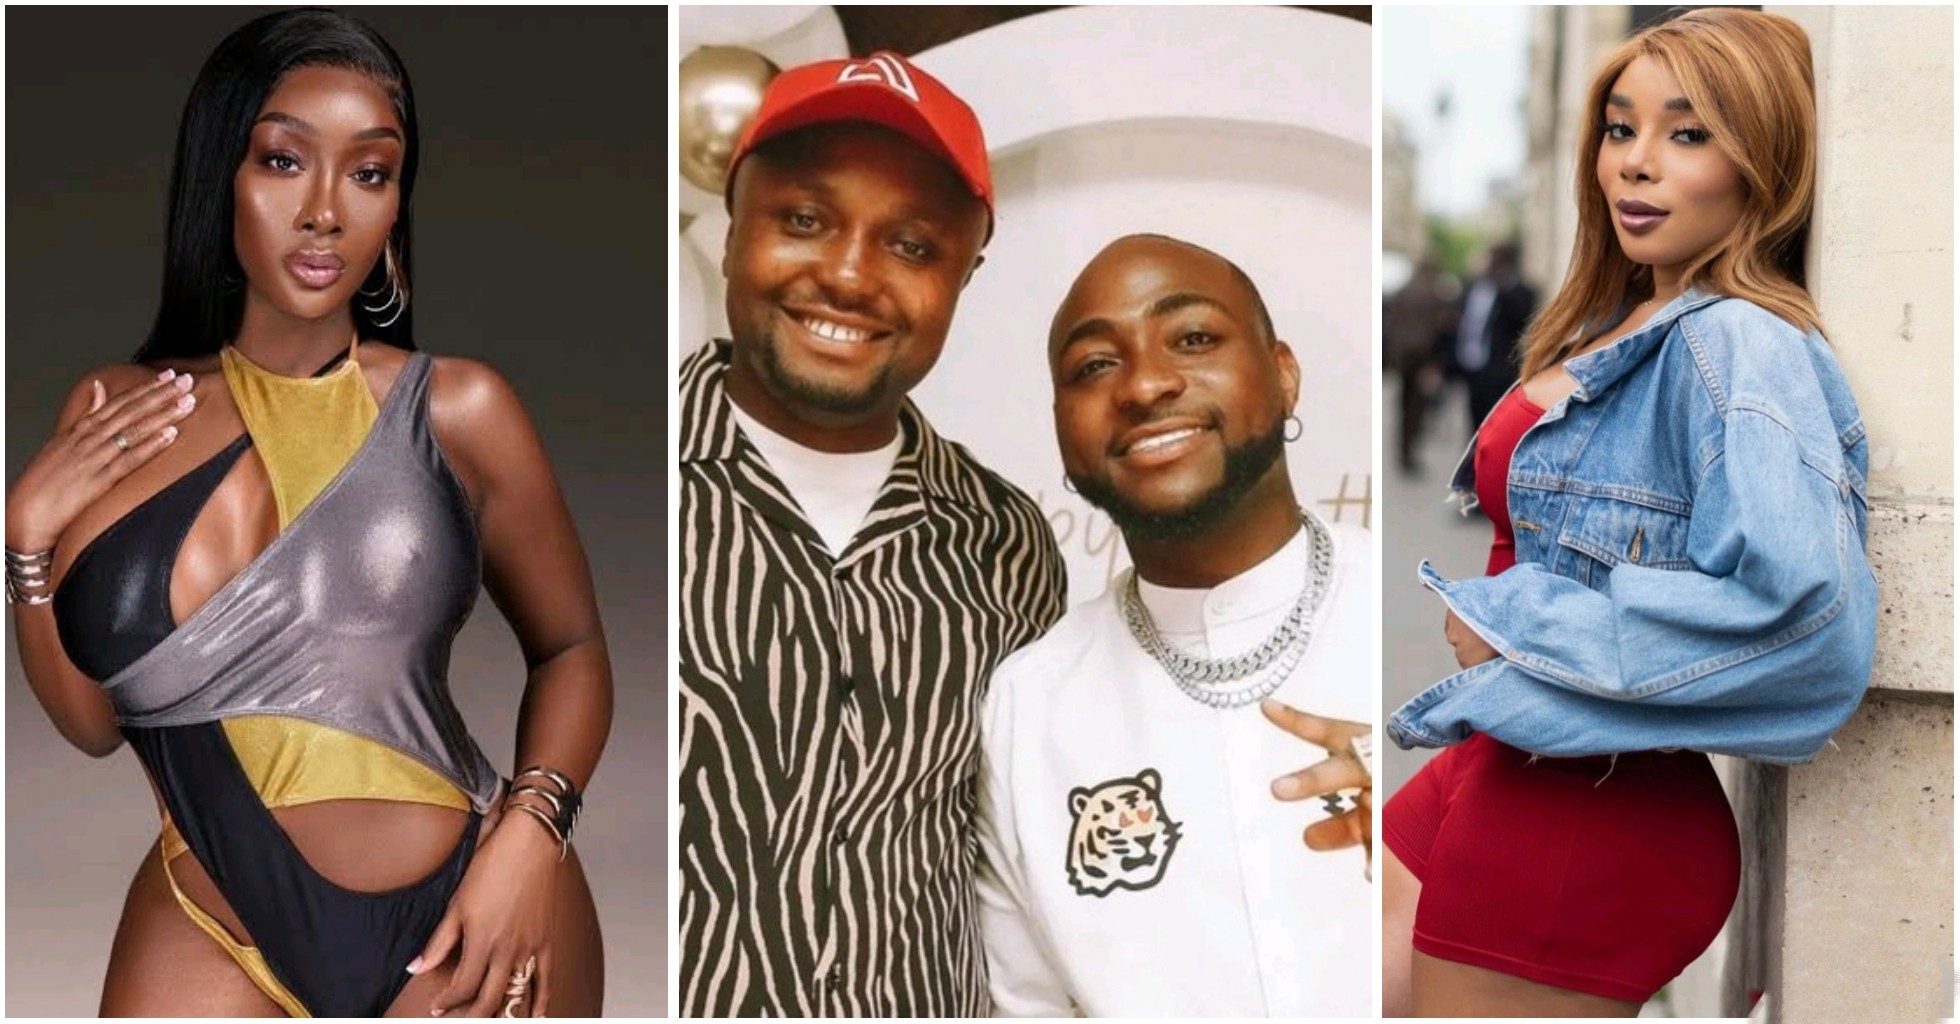 Isreal DMW begs the public on behalf of his boss over Anita and Ivanna's brouhaha